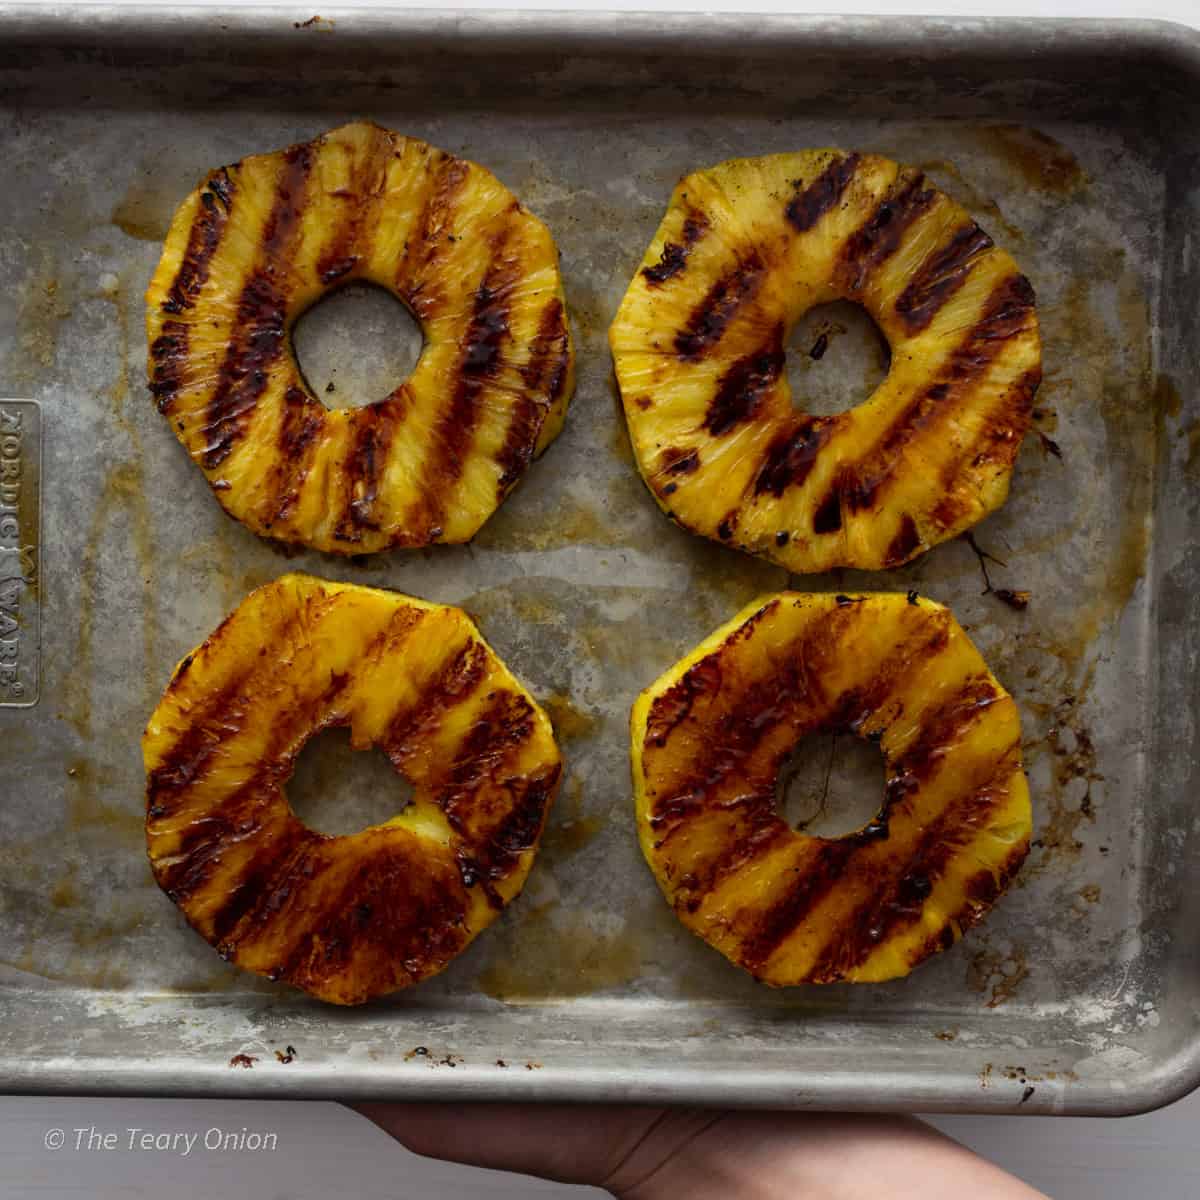 Grilled pineapple rings on a tray.